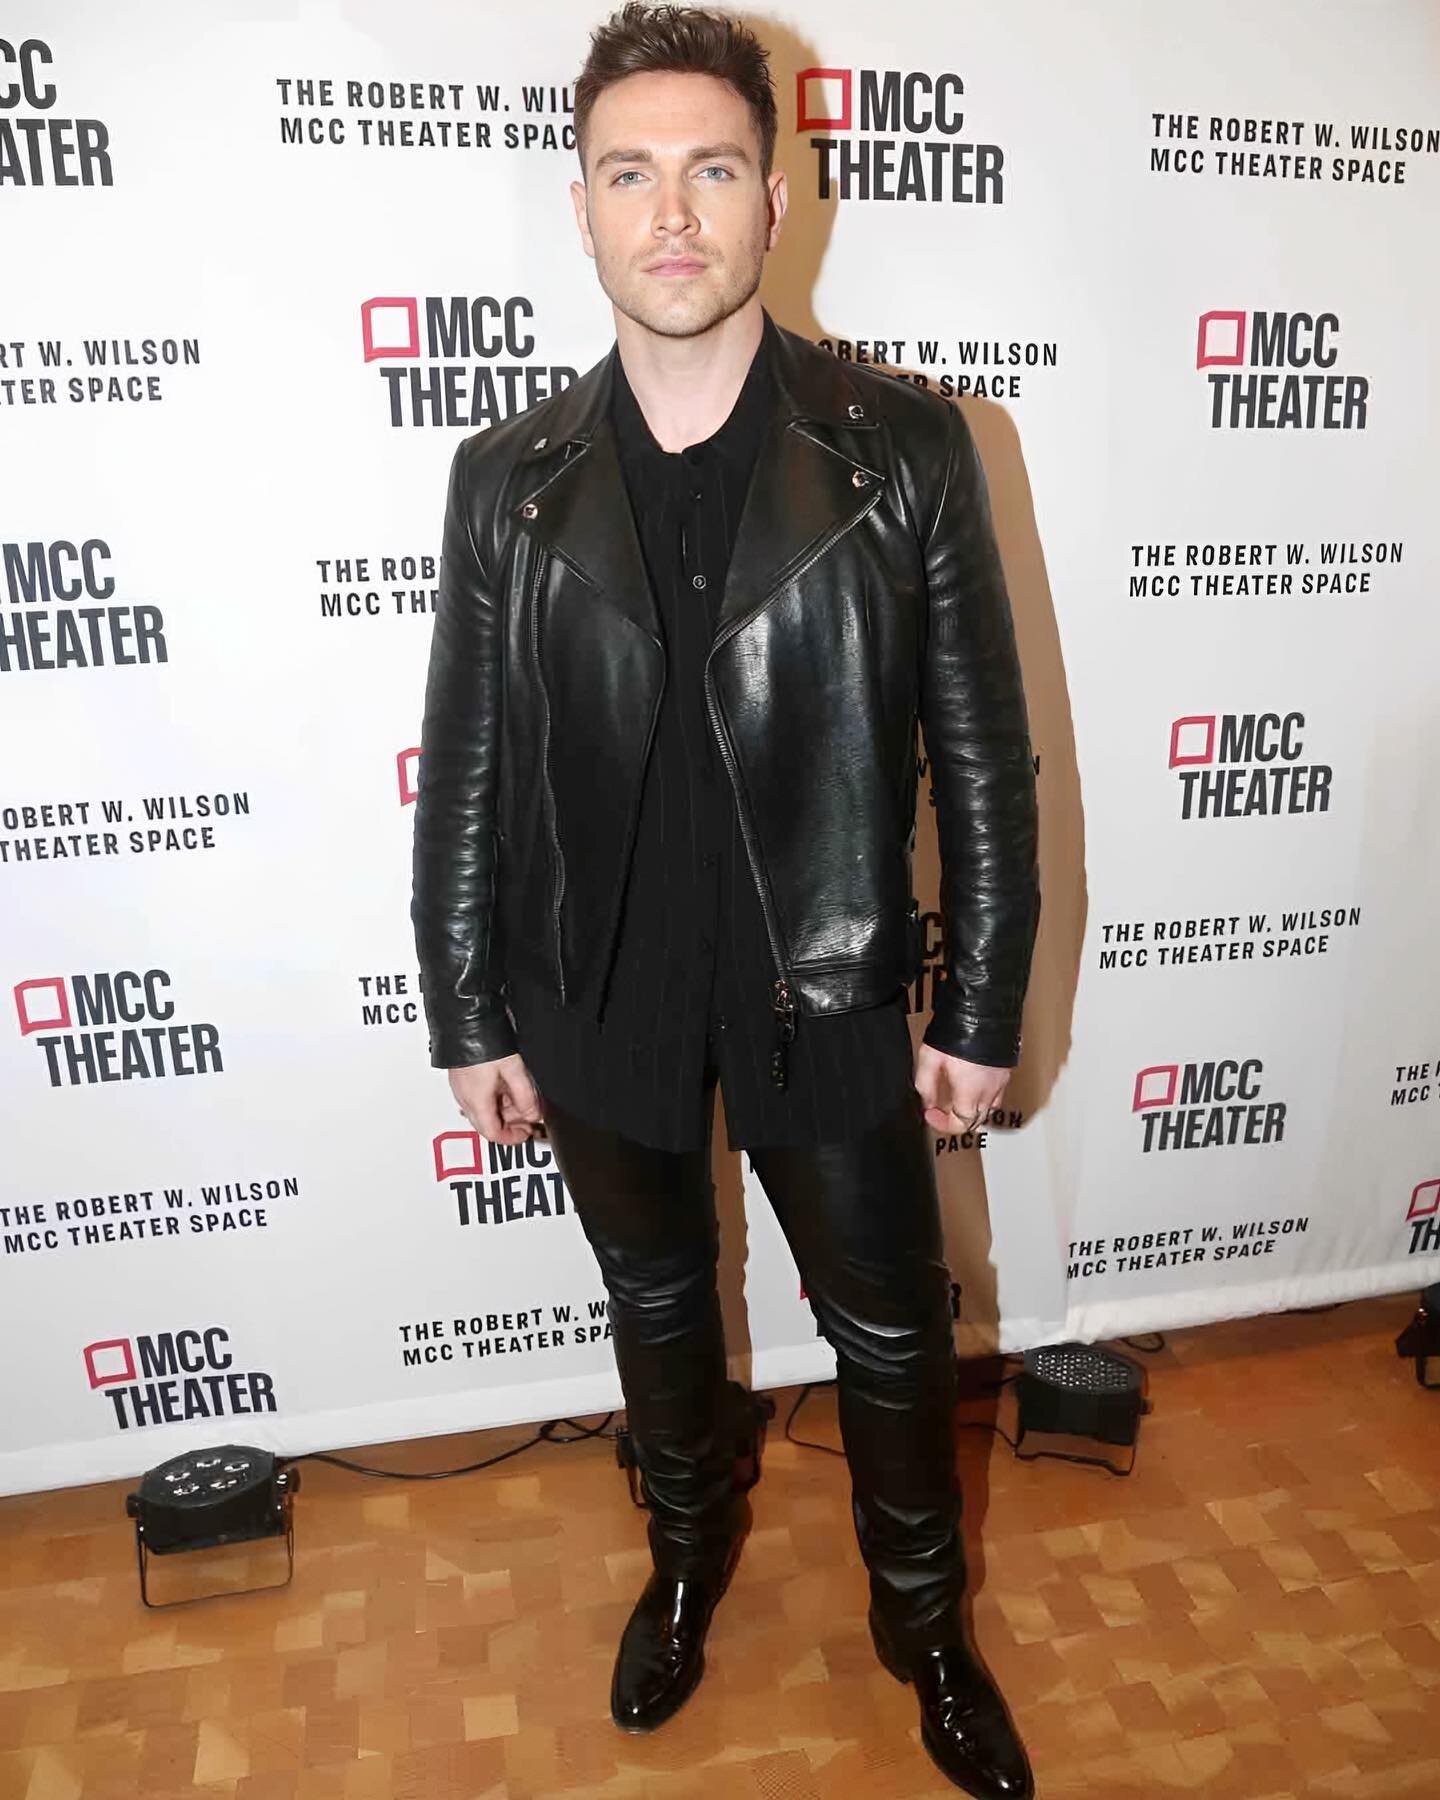 Only Gold has opened at @mcctheater. Come check us out. 

Creative Direction by @sammyratelle for @rrrcreative Agency 
Jacket @alexandermcqueen 
Shirt @rinatbrodach 
Pants @coach
Boots @jimmychoo

📸: @bruglikas / @broadwaybruce_ @officialbroadwaywor